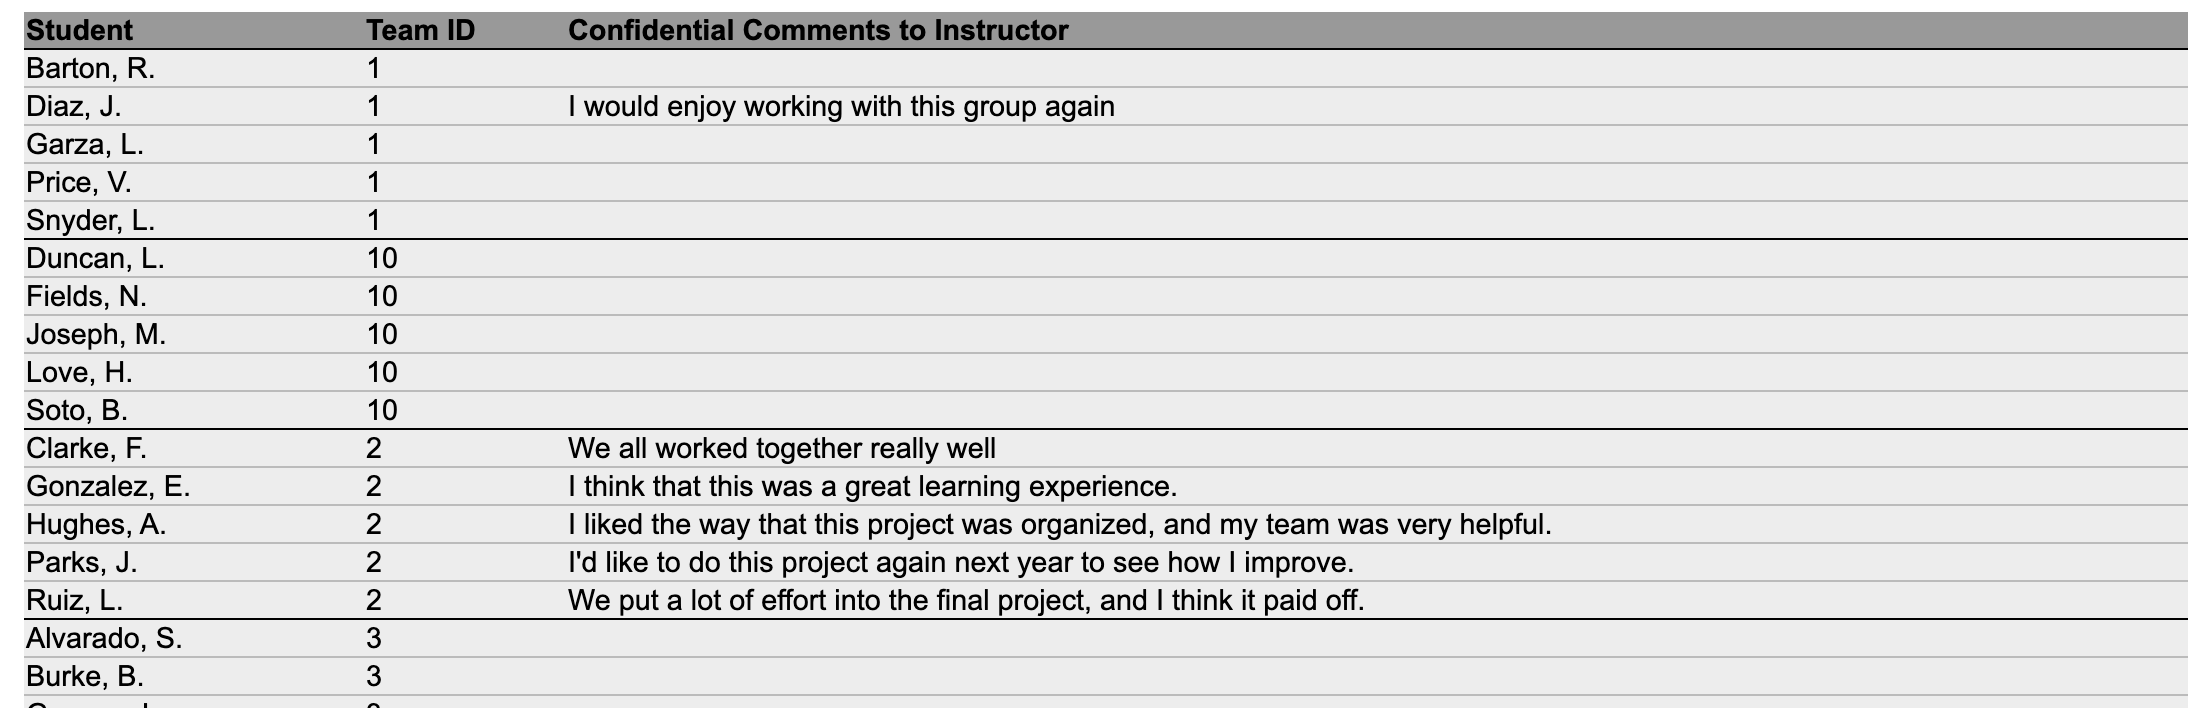 Comments to Instructor